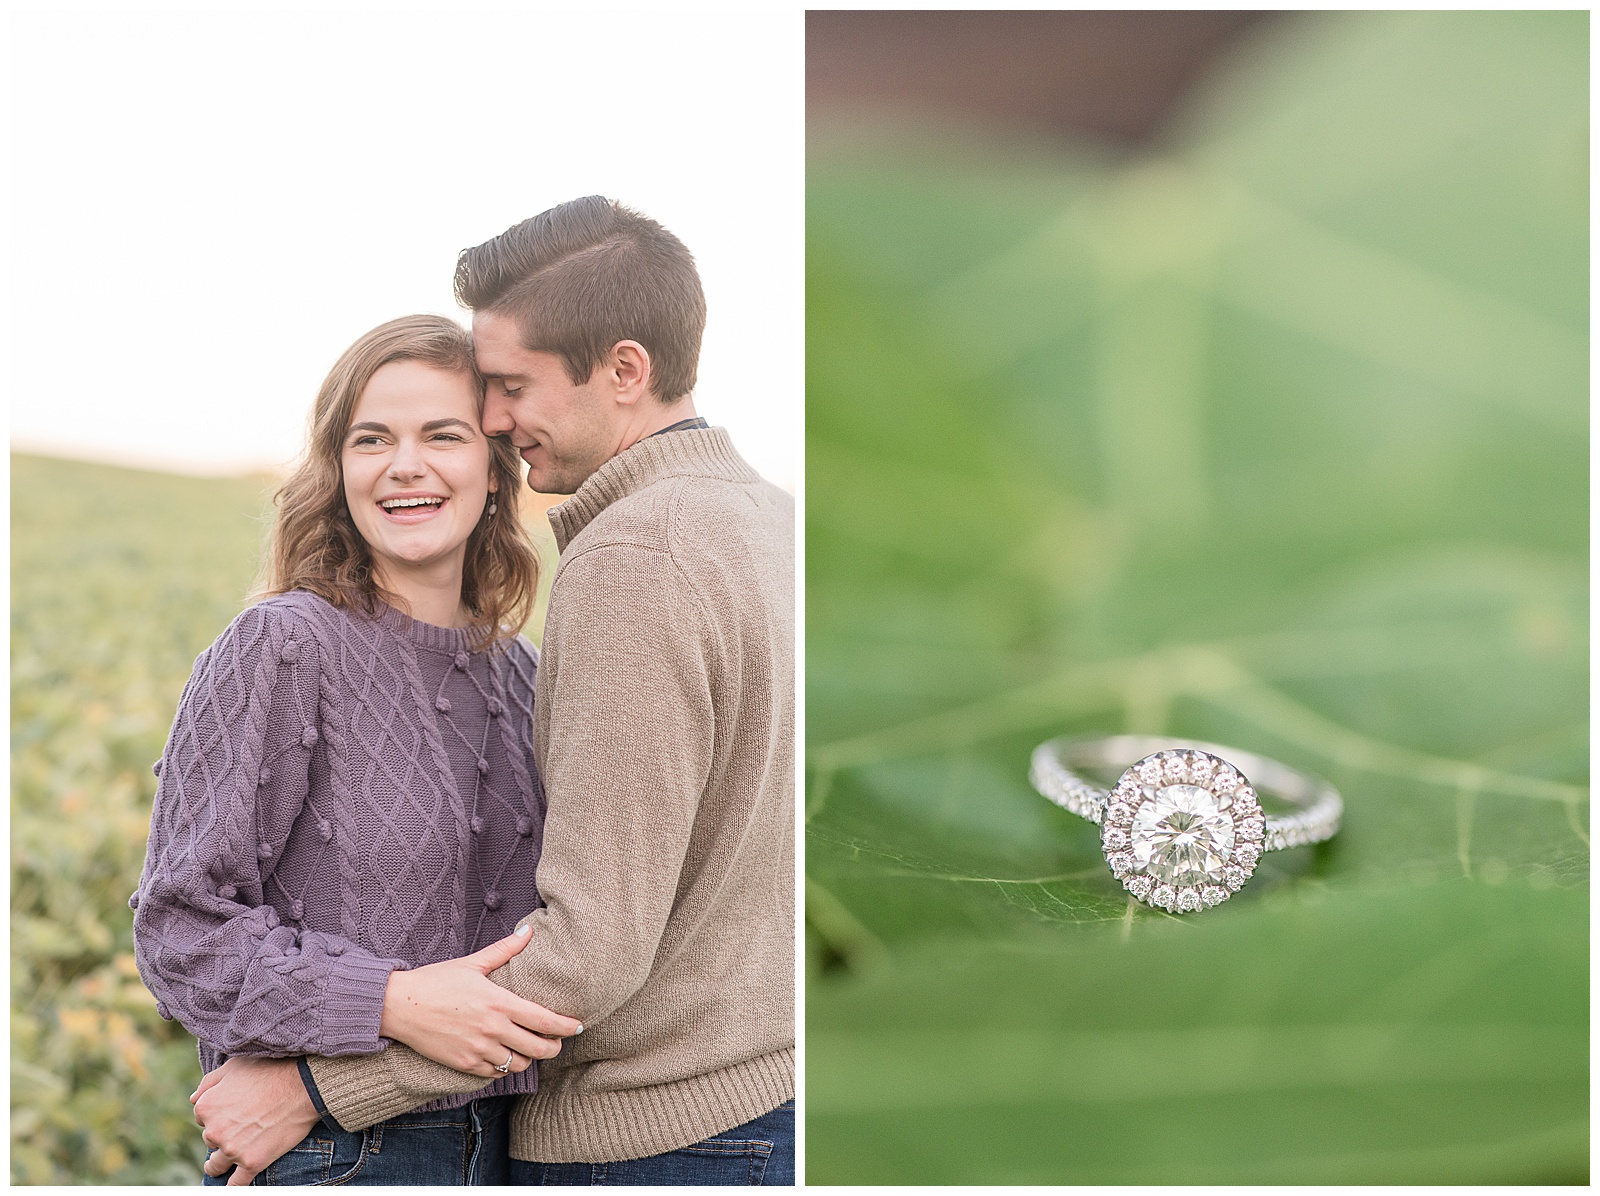 white gold and diamond engagement ring setting atop large bright green leaf